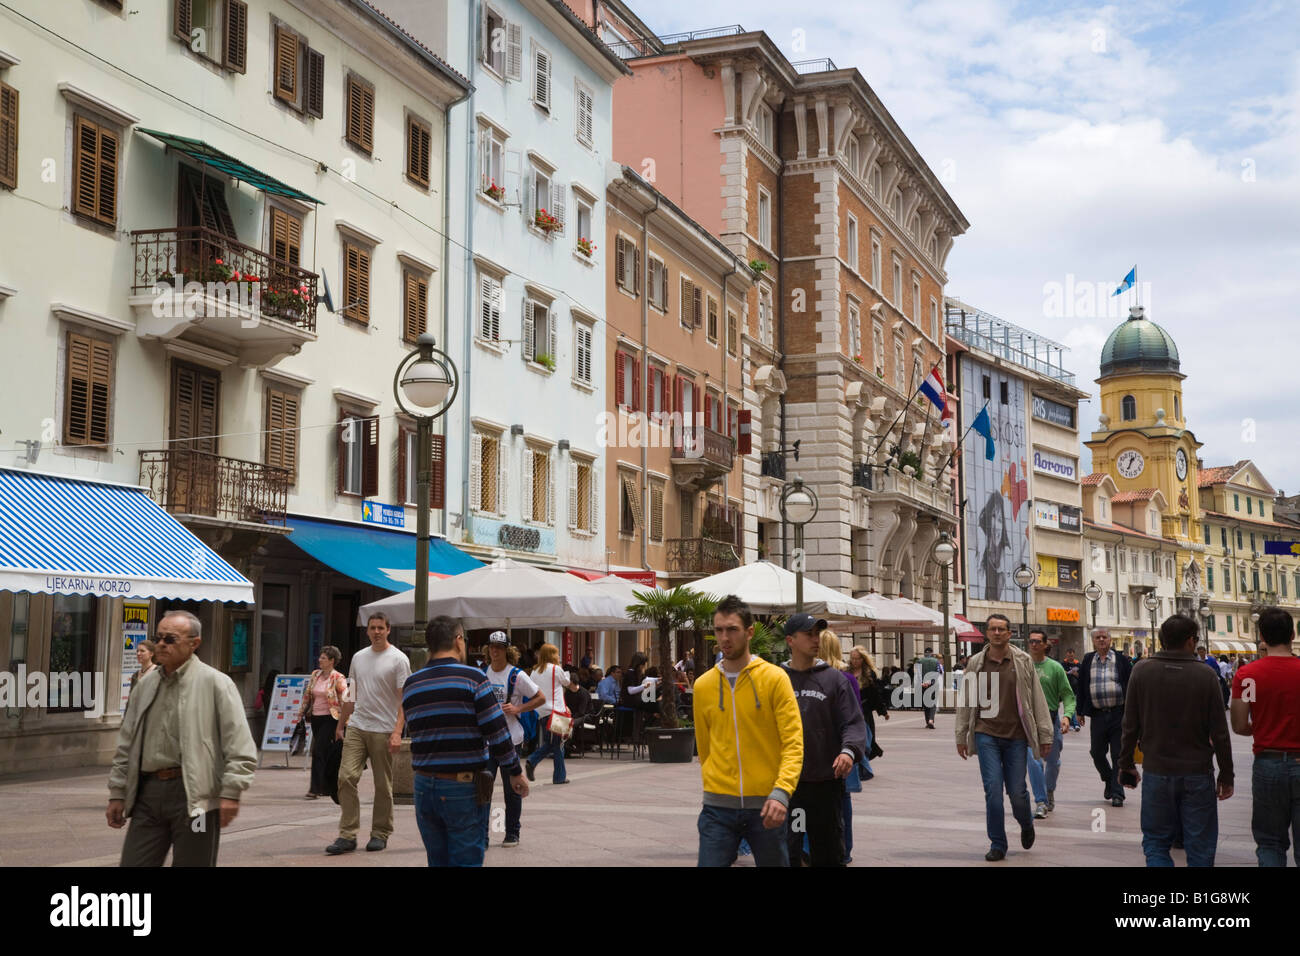 Rijeka Croatia Europe Busy pedestrianised Korzo Street with people and shops in old buildings in city centre Stock Photo